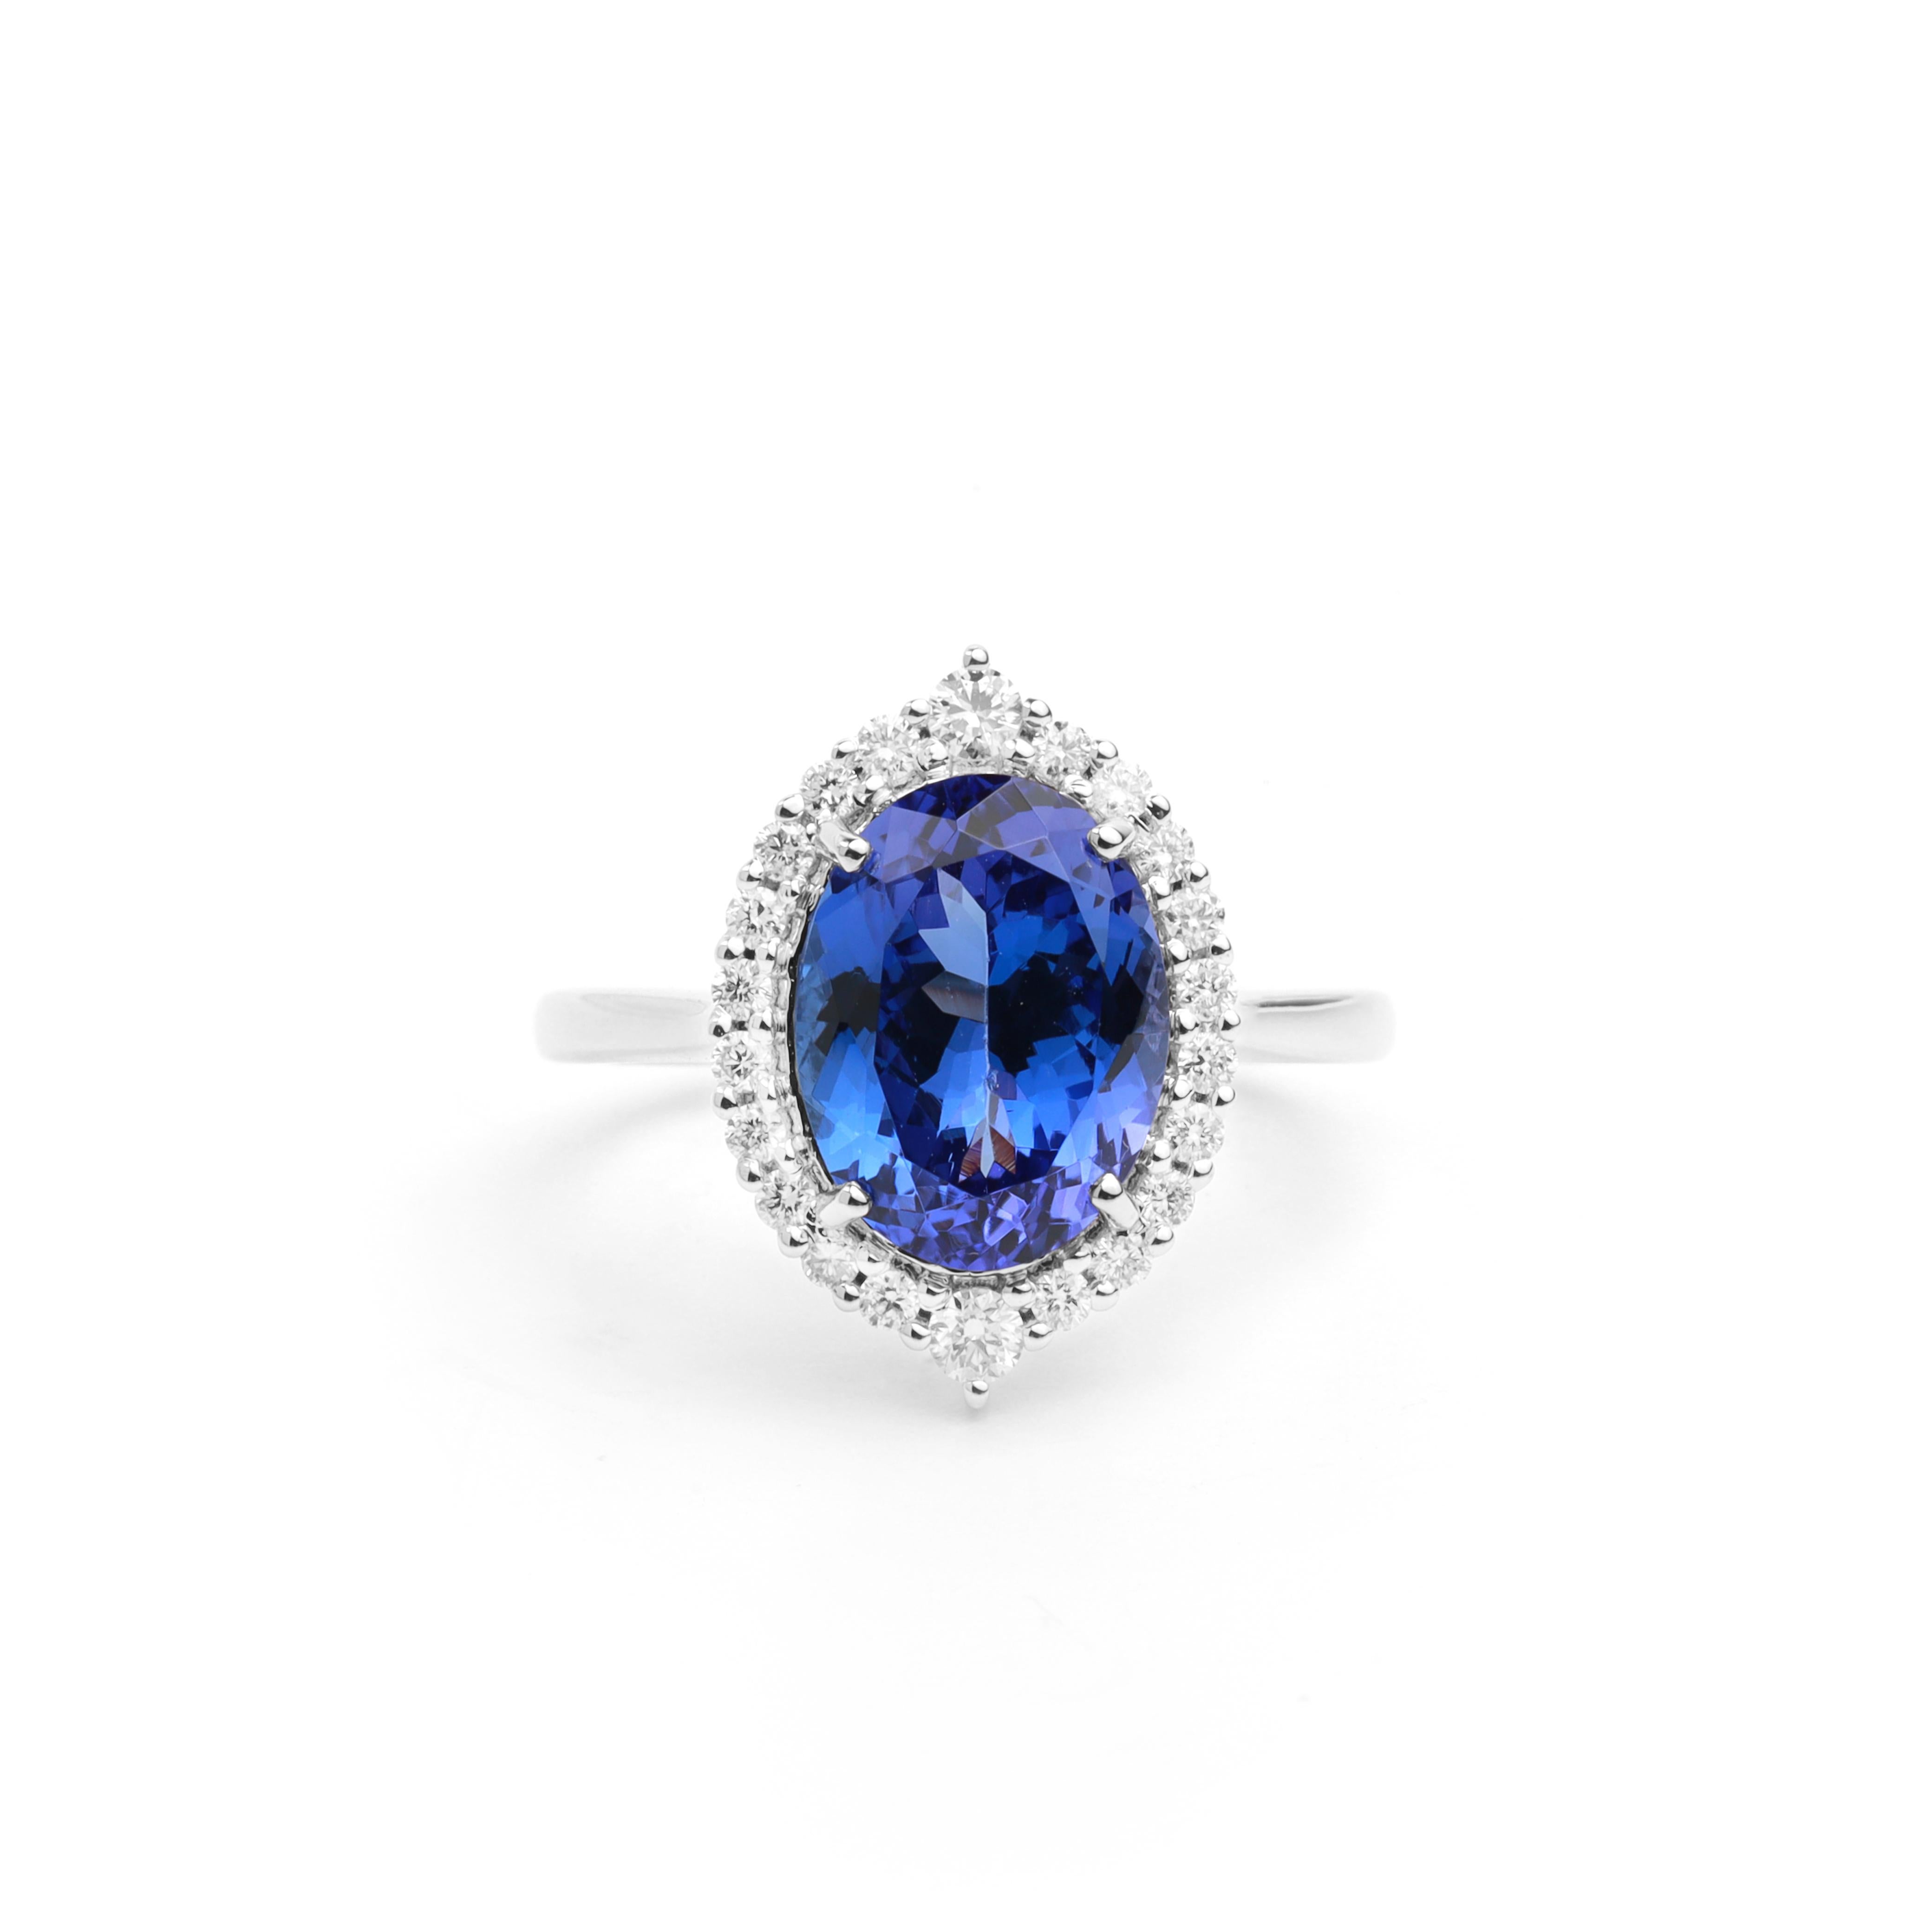 3.5 Carat Oval Natural AAA Tanzanite Diamond Halo Cocktail Engagement Ring 18k Gold

Available in 18k white gold.

Same design can be made also with other custom gemstones per request.

Product details:

- Solid gold

- Diamond - approx. 1.3mm E